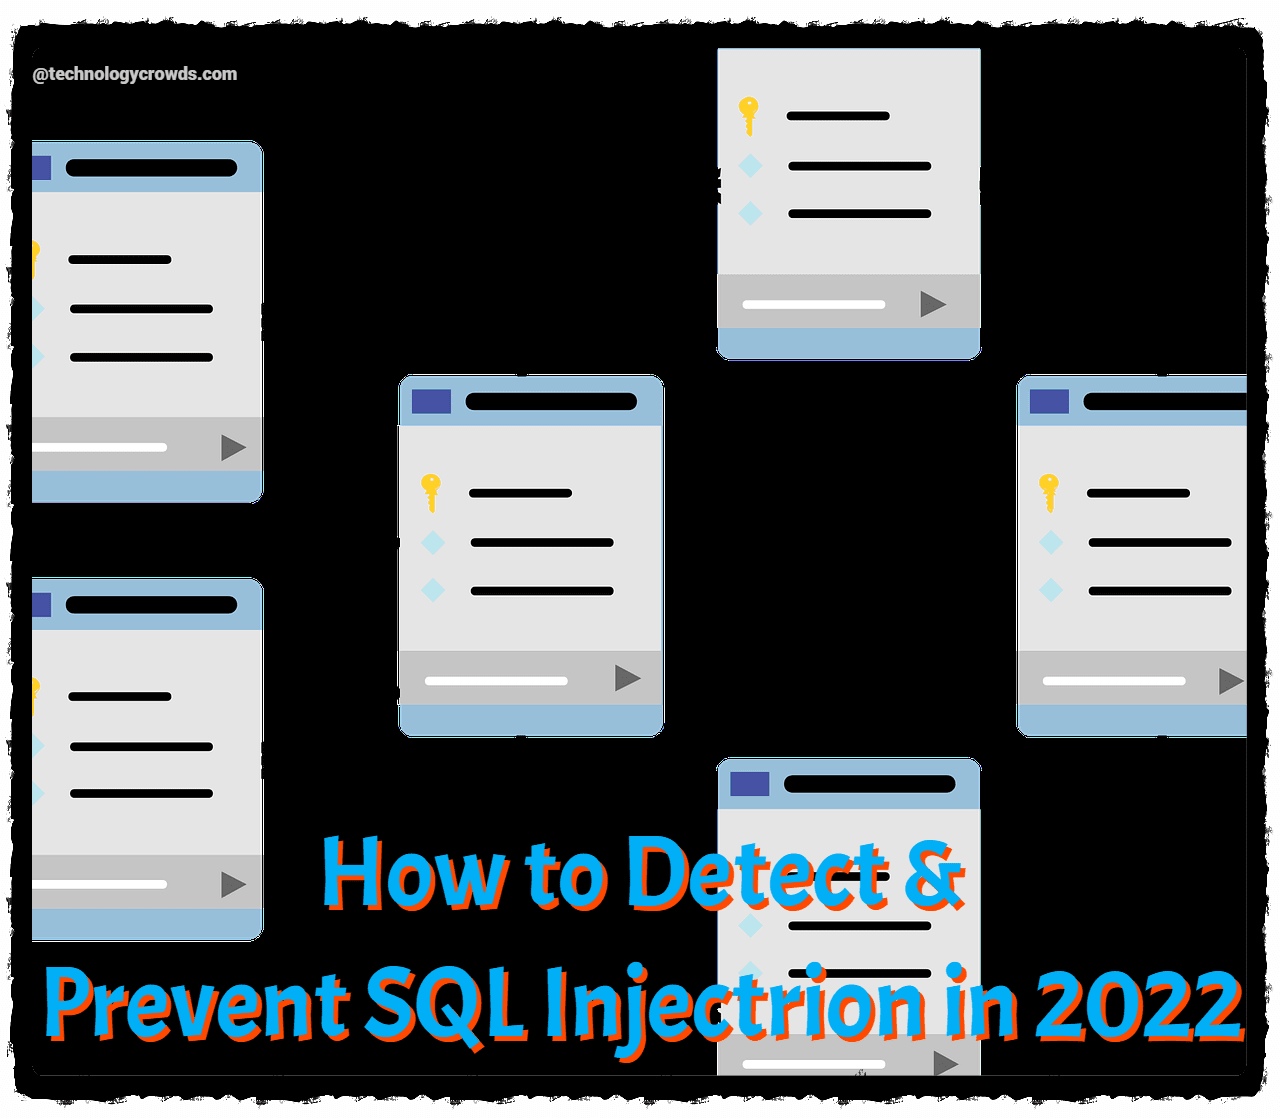 SQL Injection: How to Detect and Prevent Them in 2022